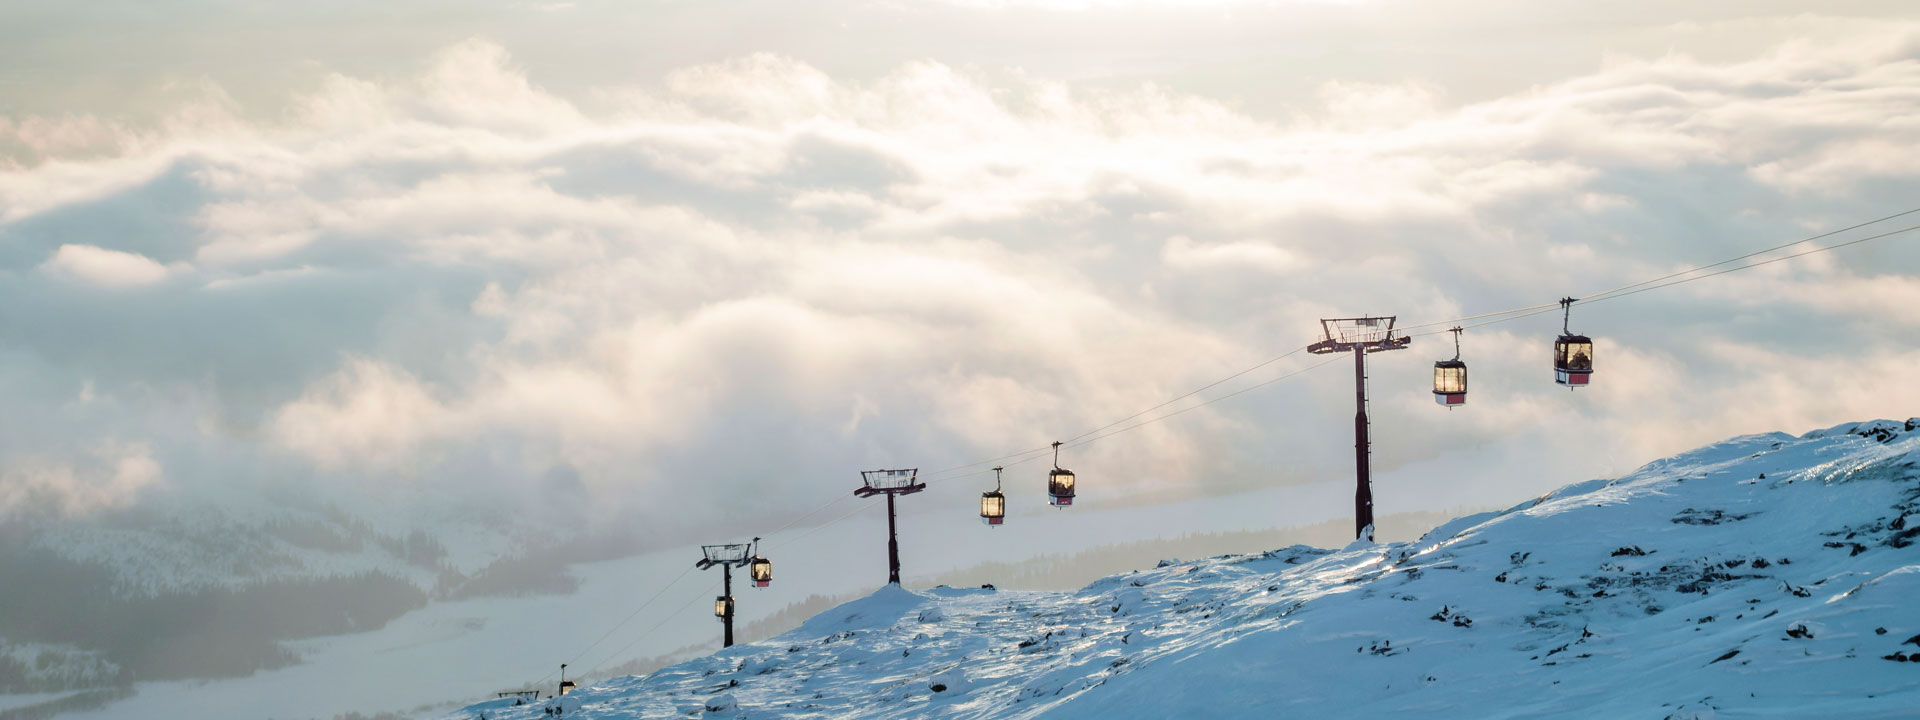 Ski lift with mountains and clouds in the background